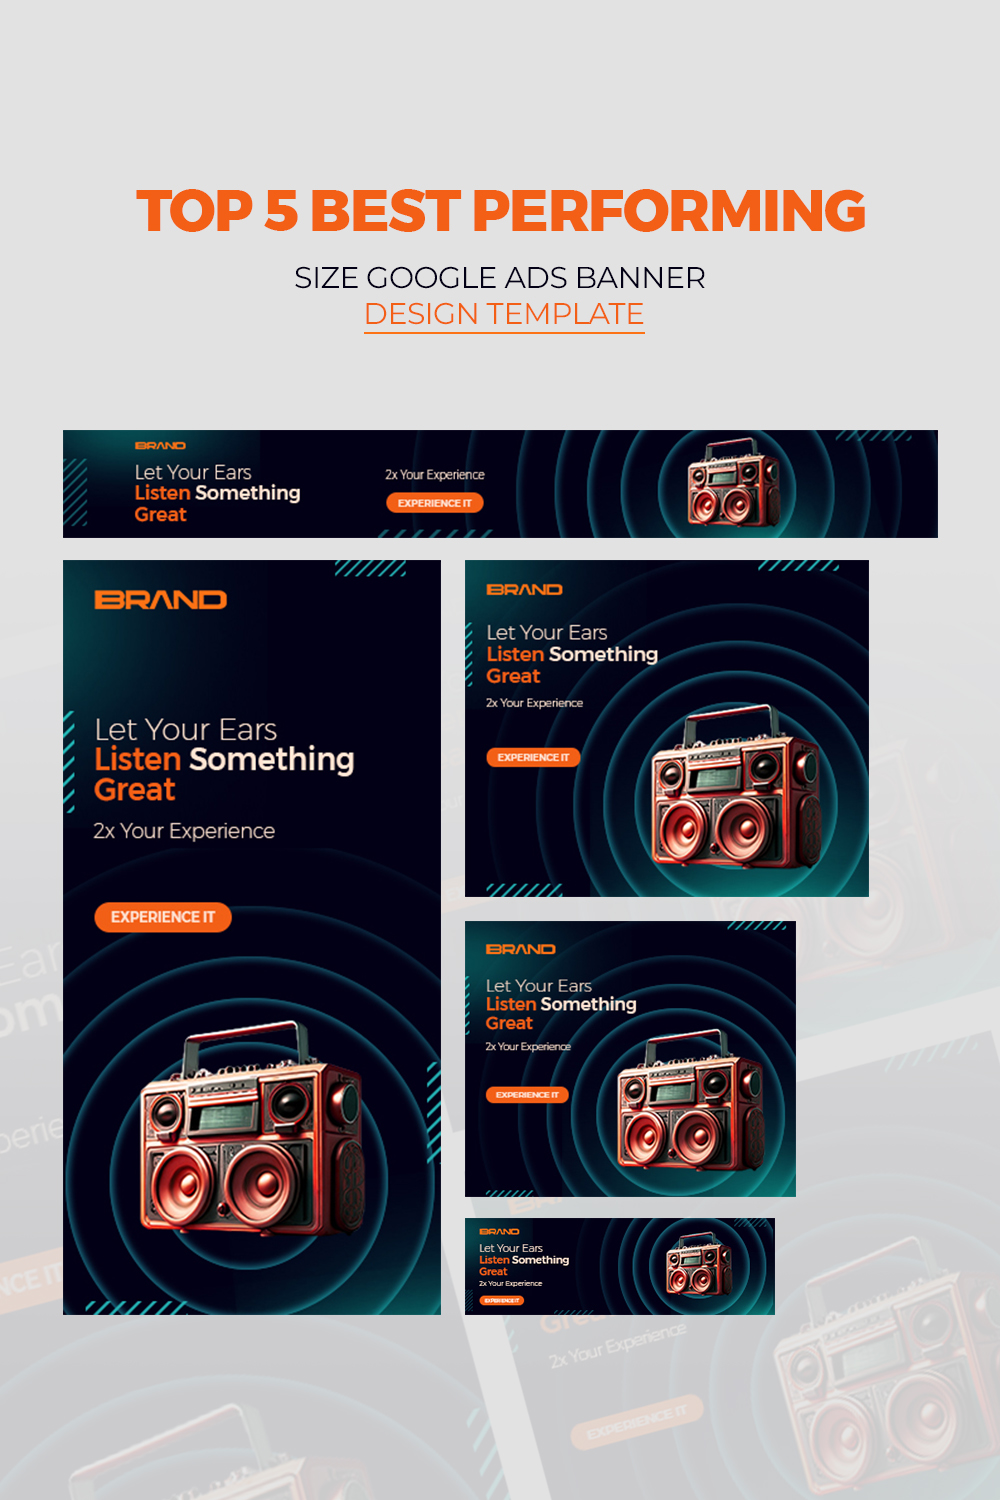 Top 5 best performing size google ads banner design template pinterest preview image.